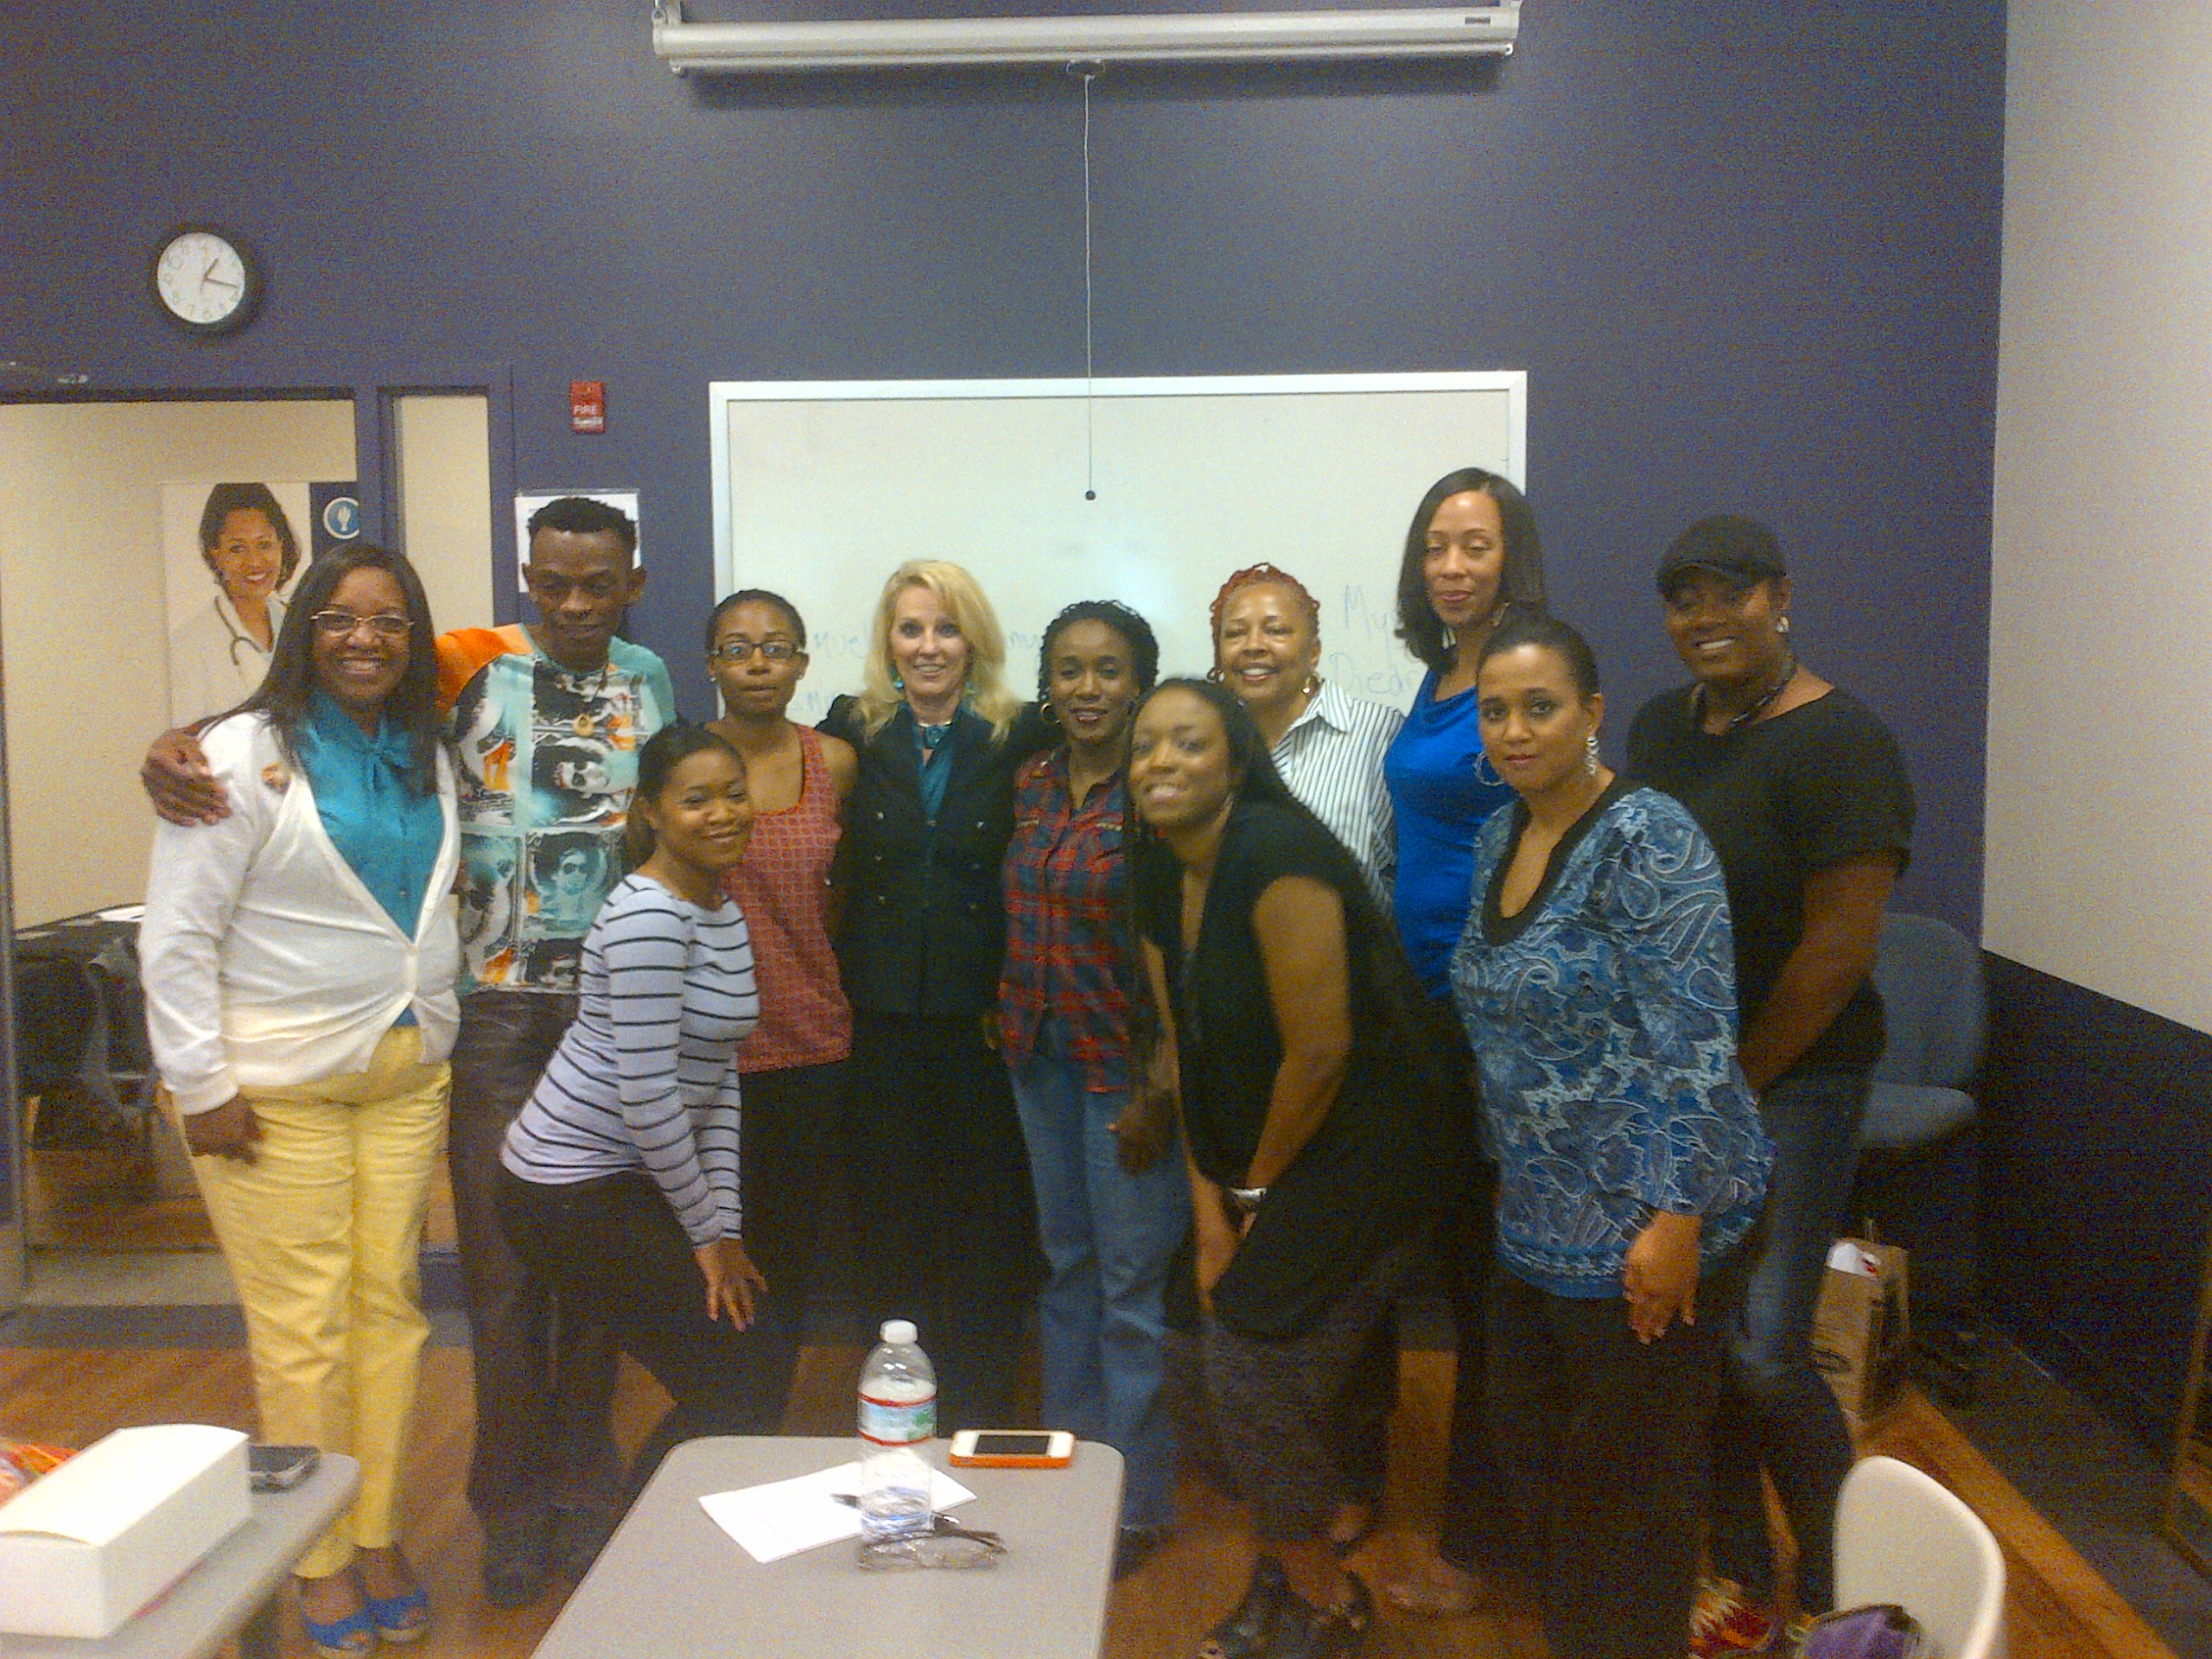 Women in TV and Film of Atlanta Workshop given by former CNN legal correspondent Holly Hughes.